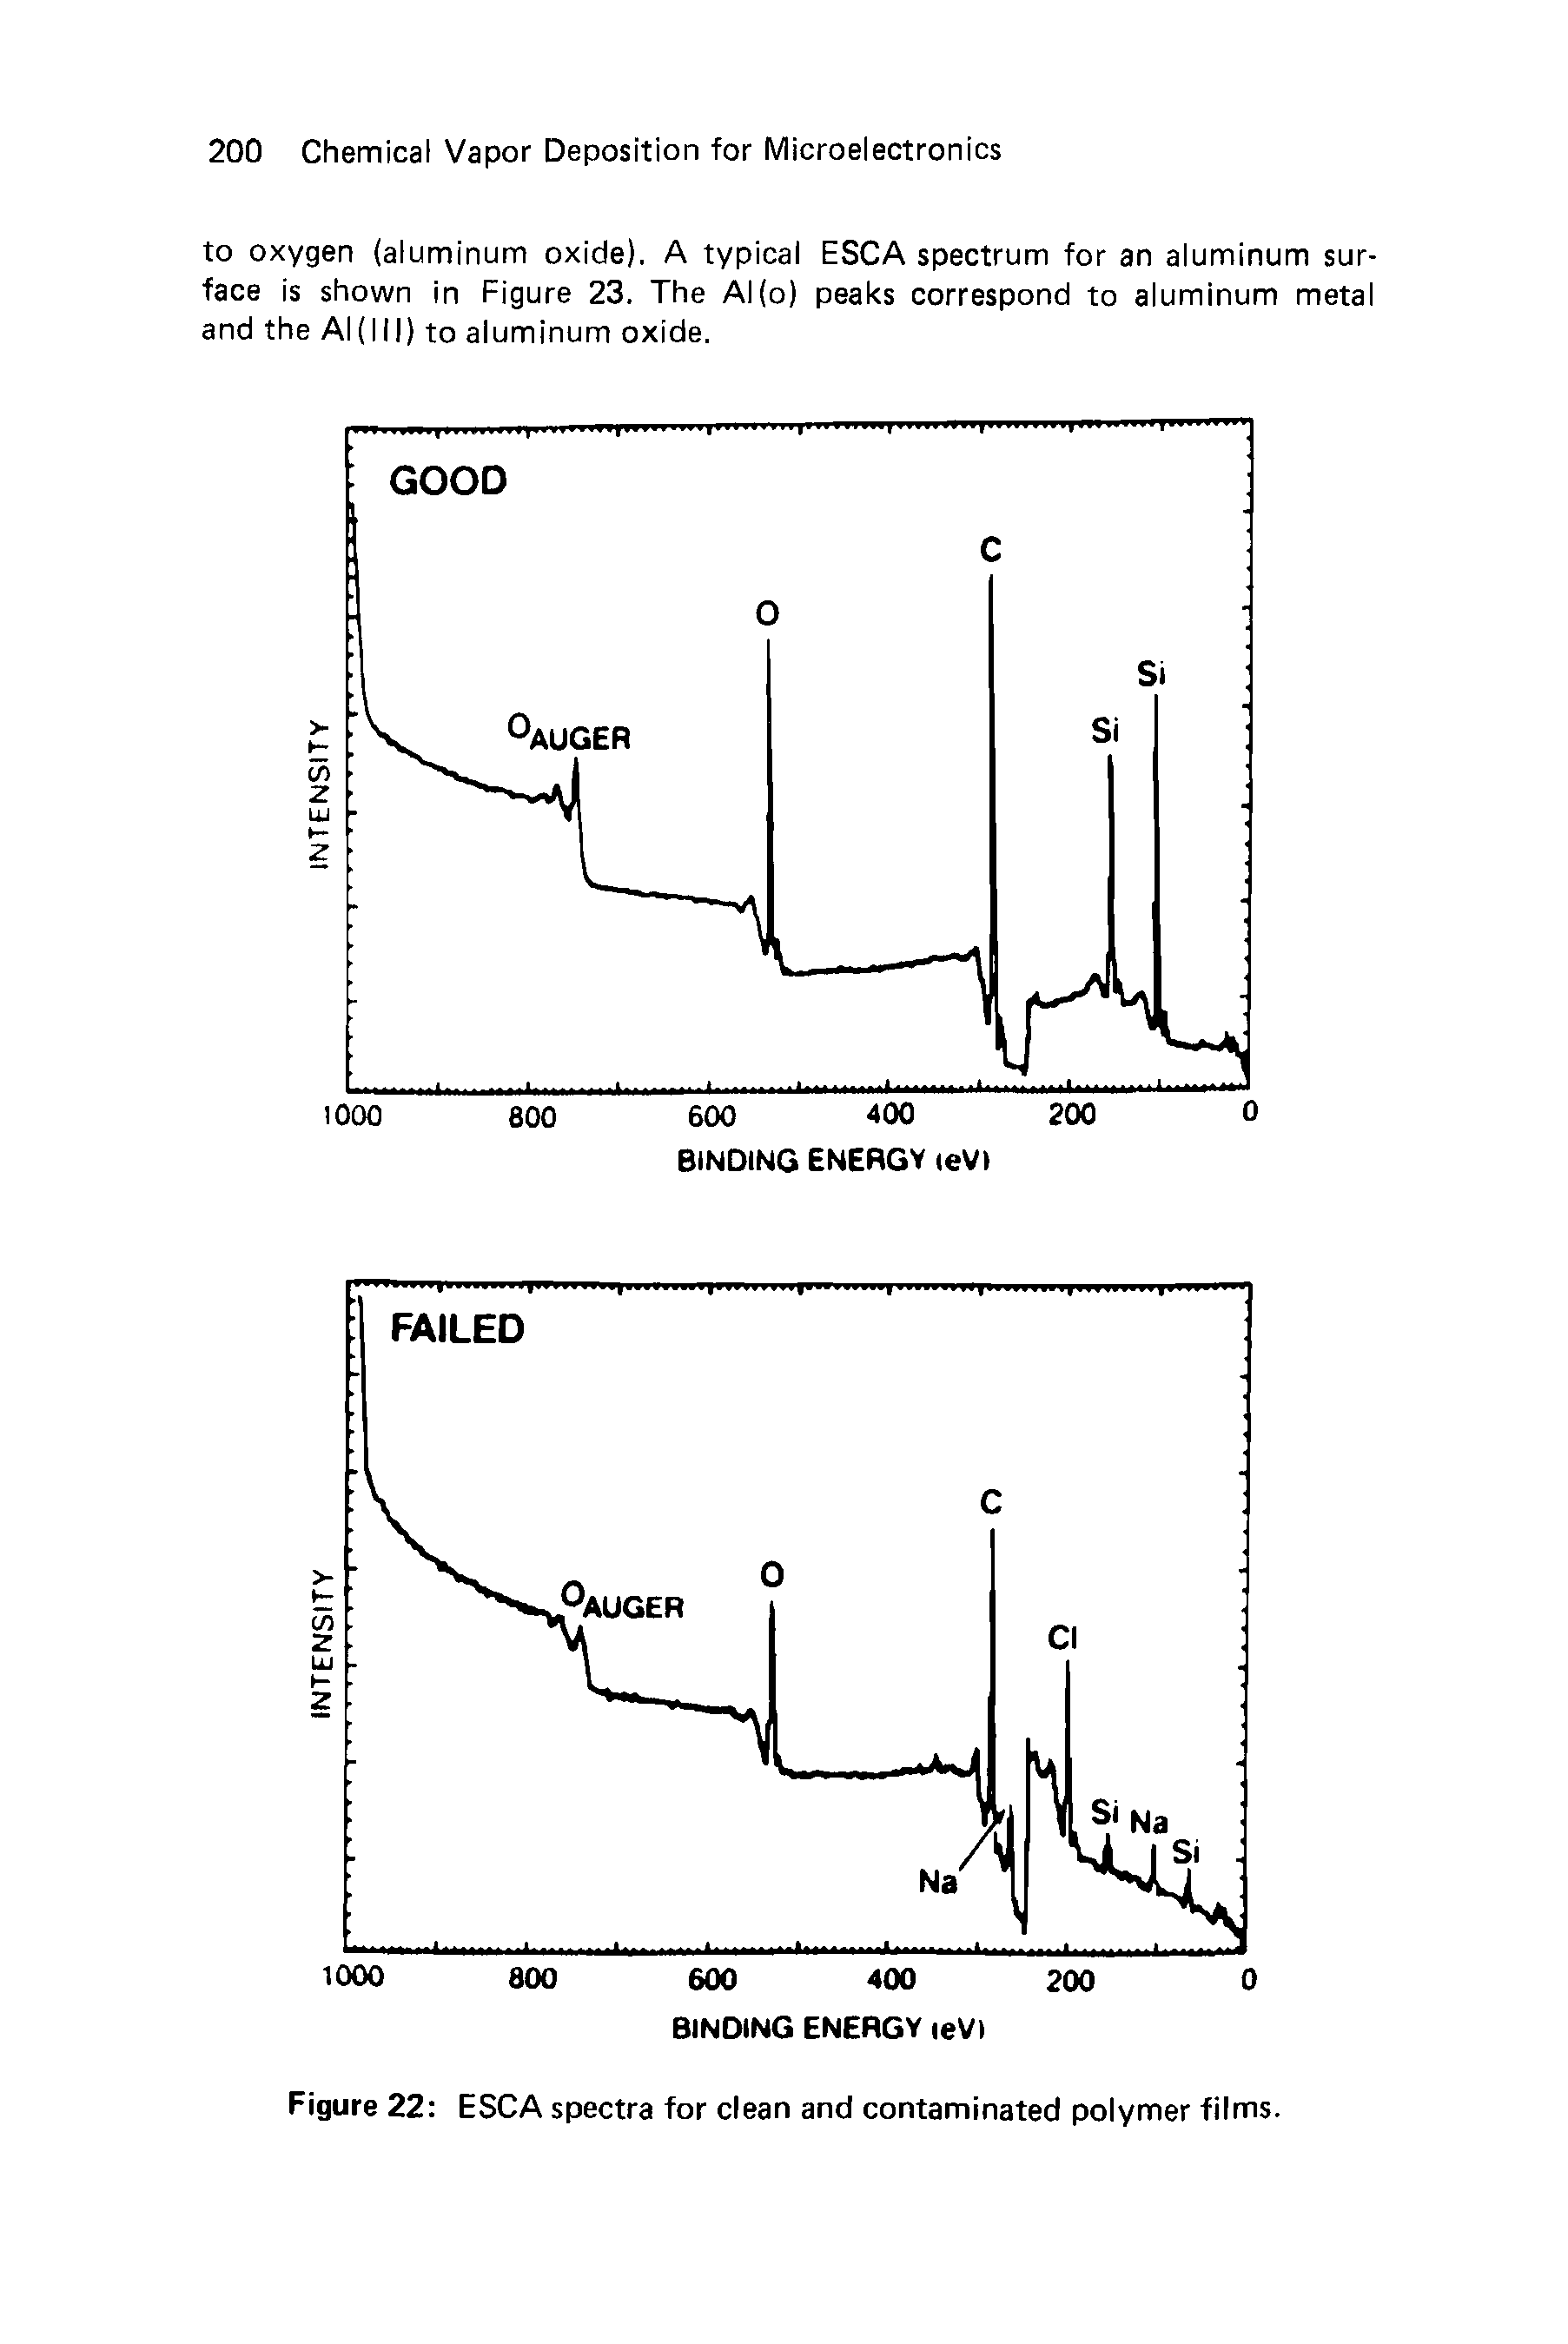 Figure 22 ESCA spectra for clean and contaminated polymer films.